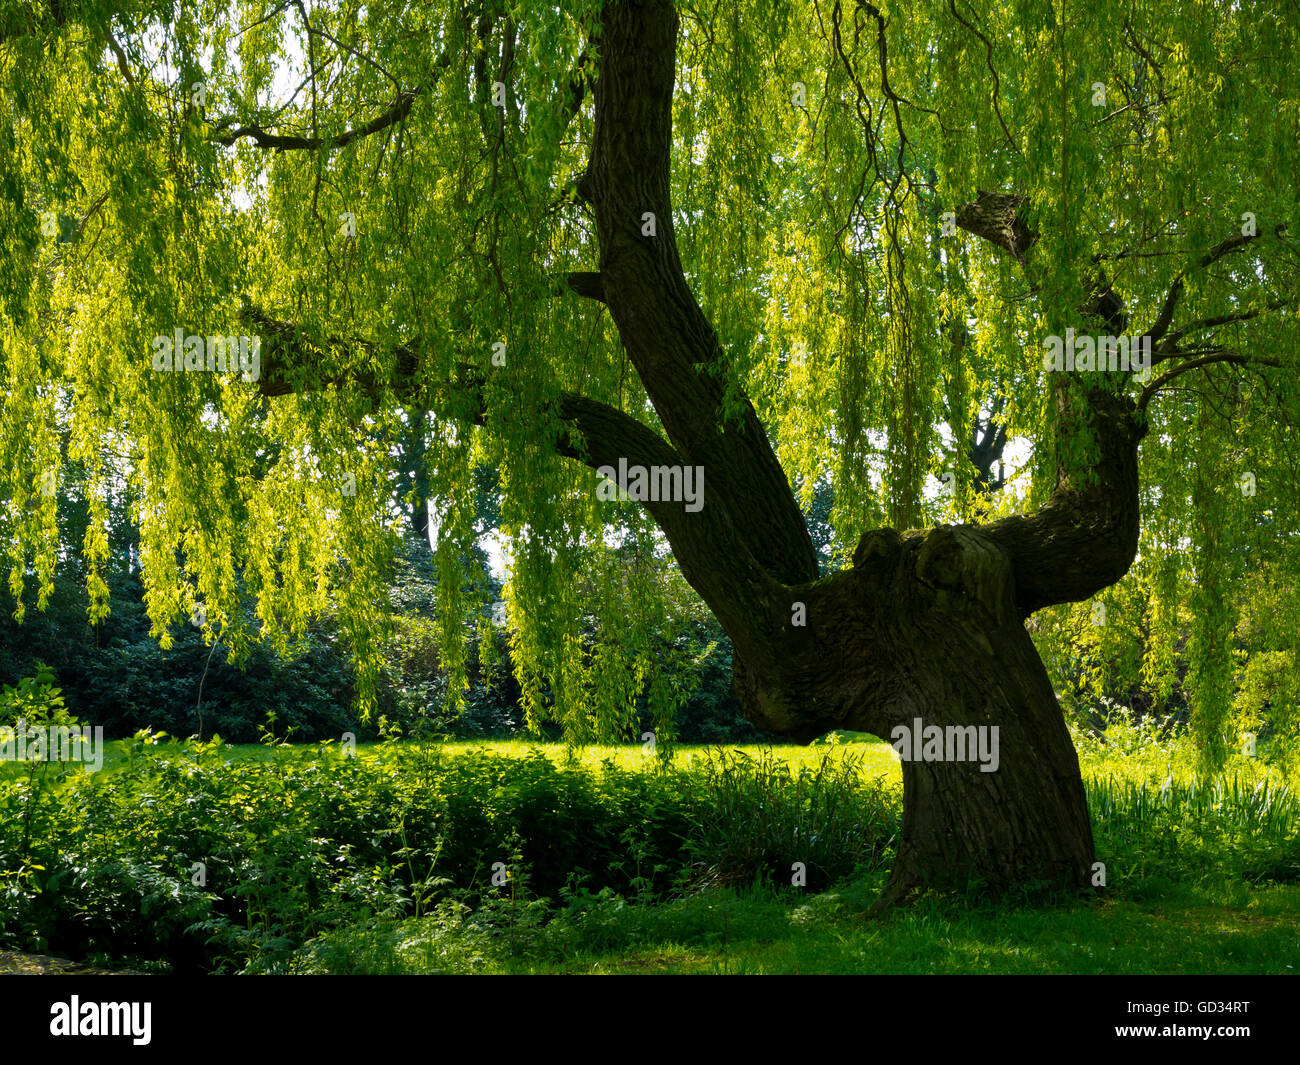 Willow tree genus Salix a deciduous tree growing next to a stream with sunlight through the branches Stock Photo